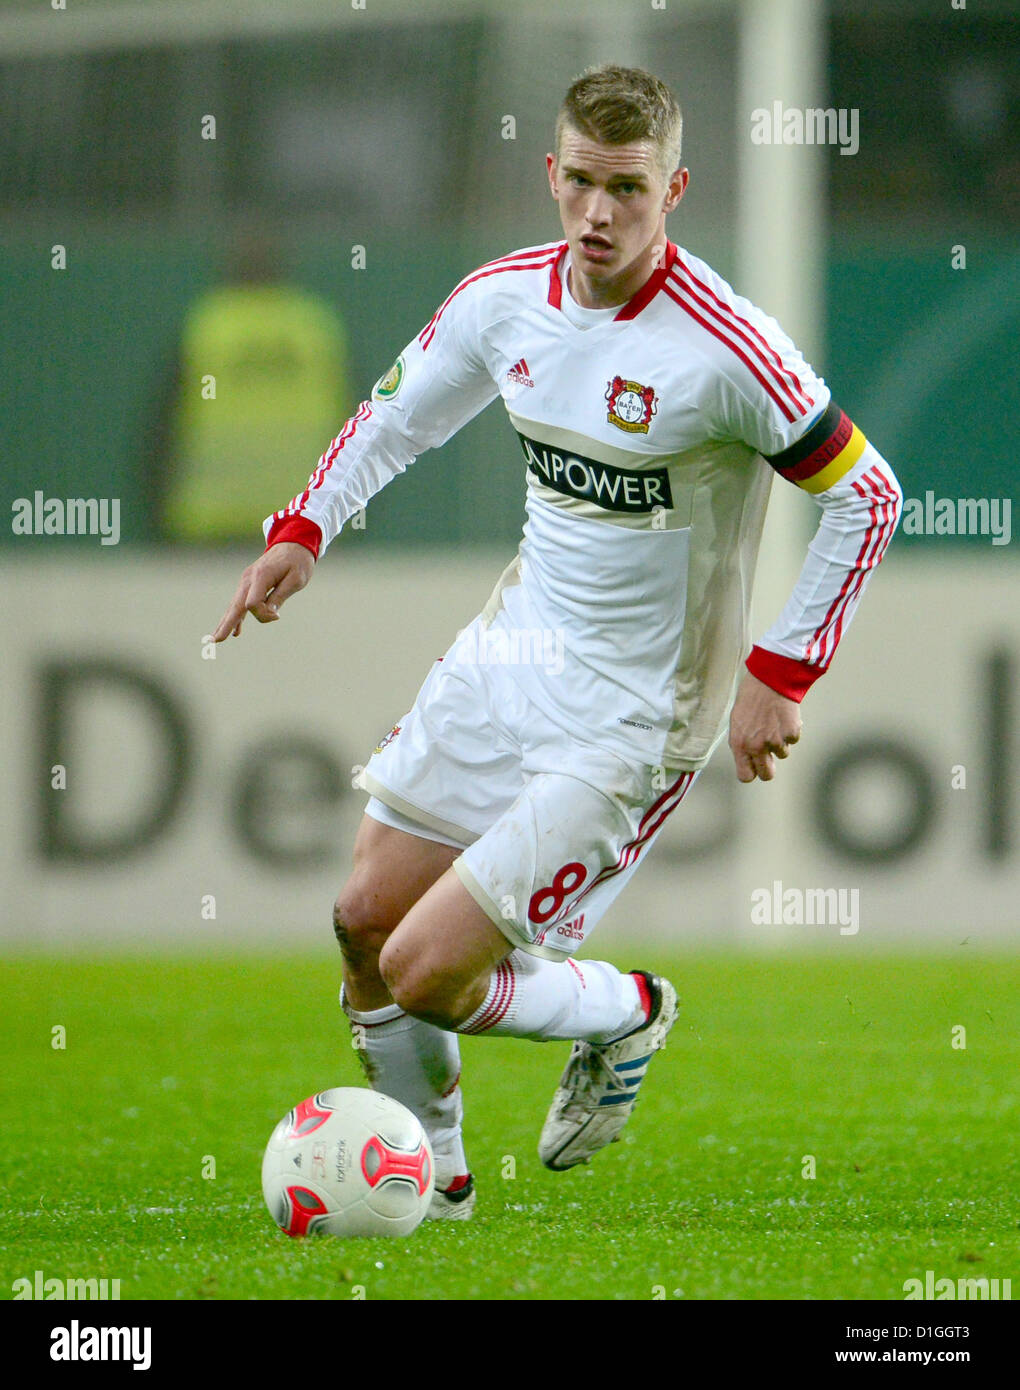 Leverkusen's Lars Bender plays the ball during the DFB Cup soccer match between VfL Wolfsburg and Bayer Leverkusen at the Volkswagen-Arena in Wolfsburg, Germany, 19 December 2012. Photo: Peter Steffen Stock Photo